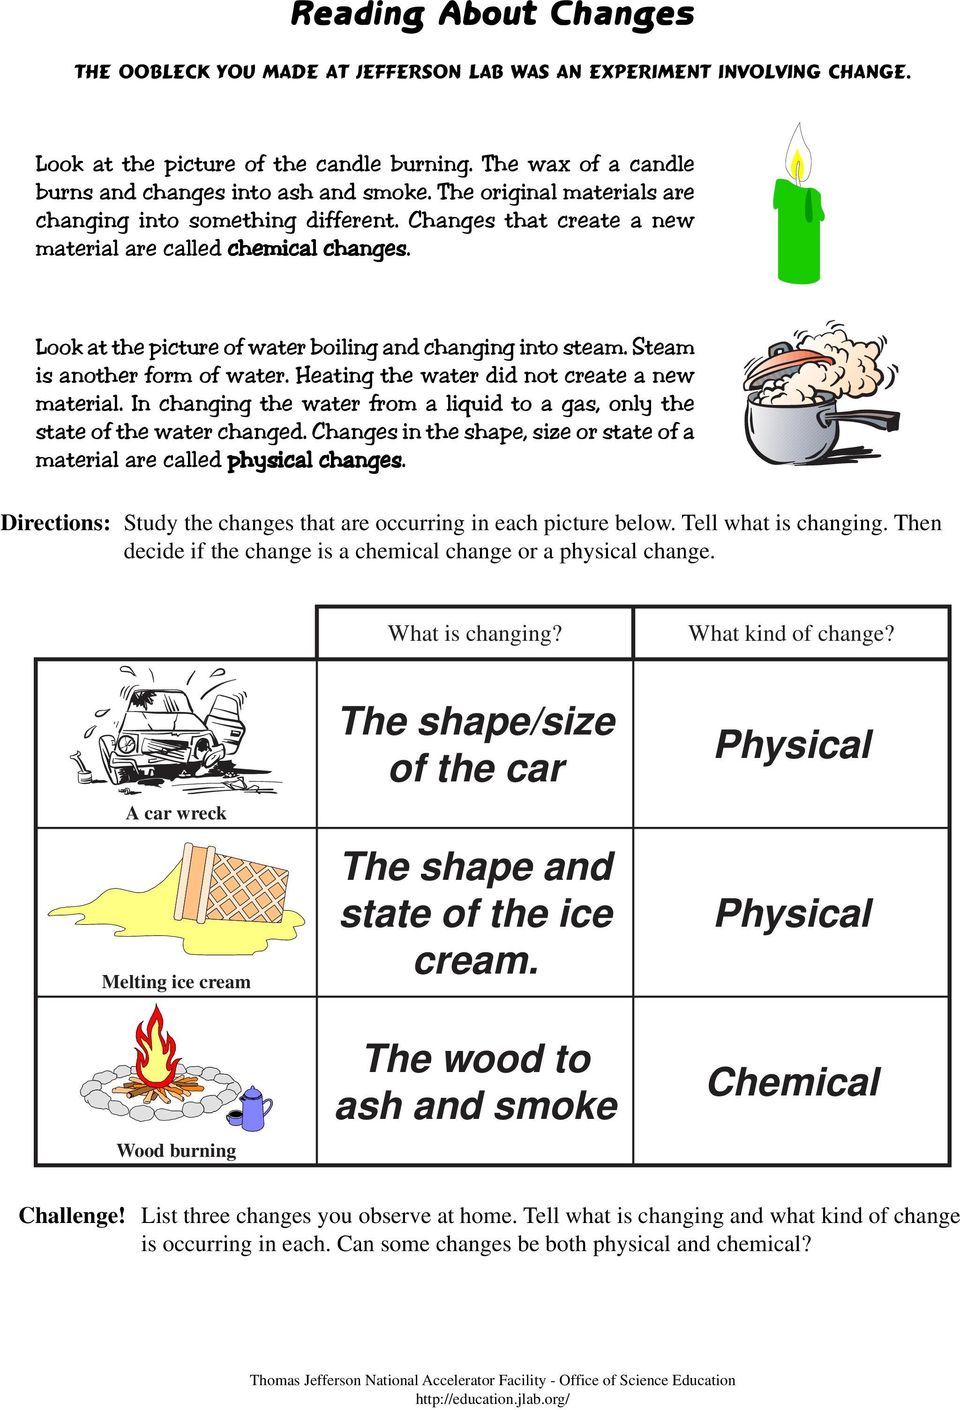 Steam is another form of water. Heating the water did not create a new material. In changing the water from a liquid to a gas, only the state of the water changed.